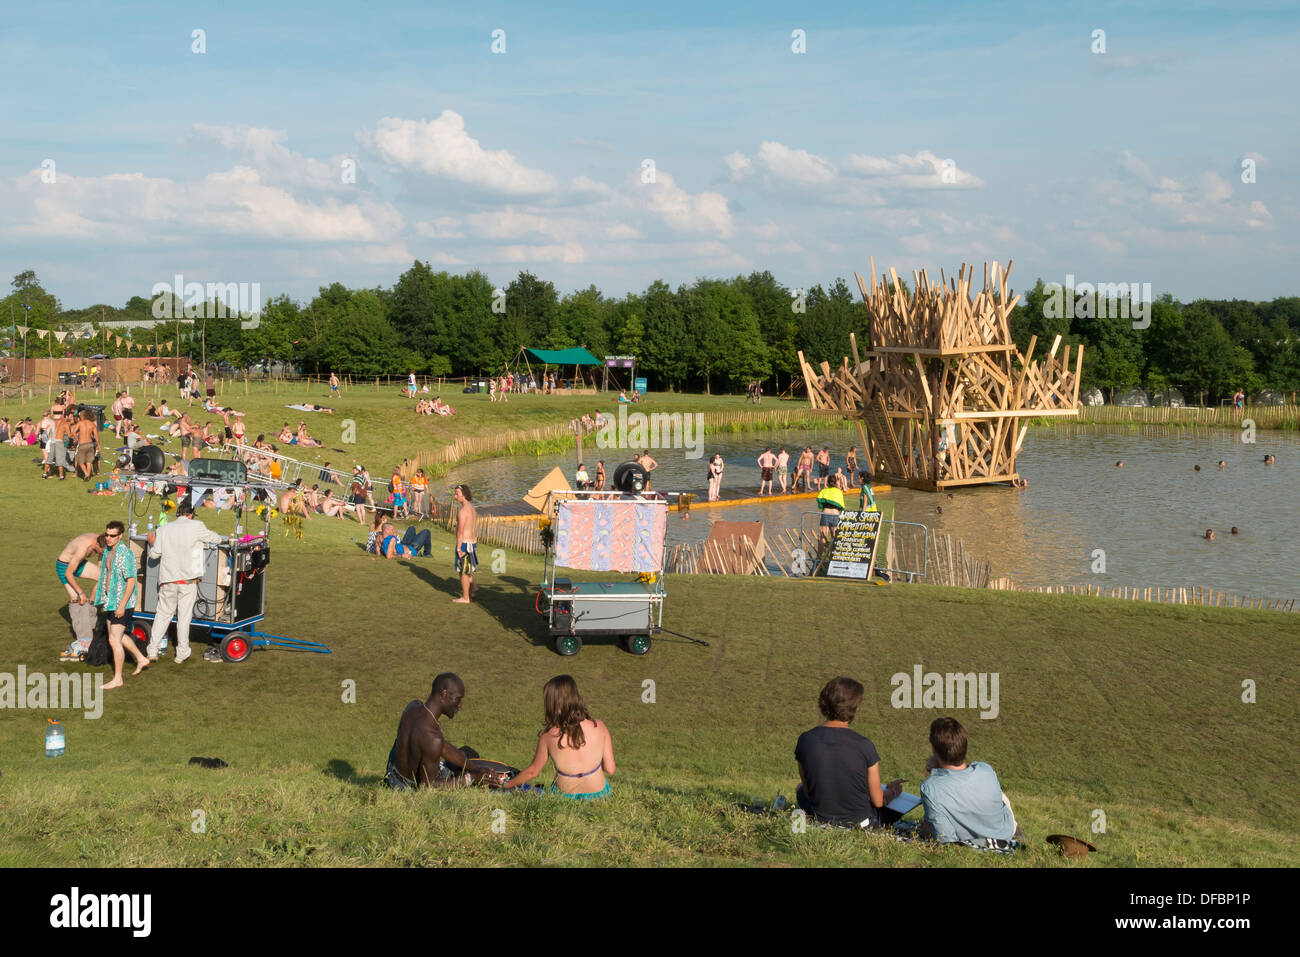 The Temple, Abbots Ripton, United Kingdom. Architect: Andrew T Cross, 2013. Overall view of festival site. Stock Photo